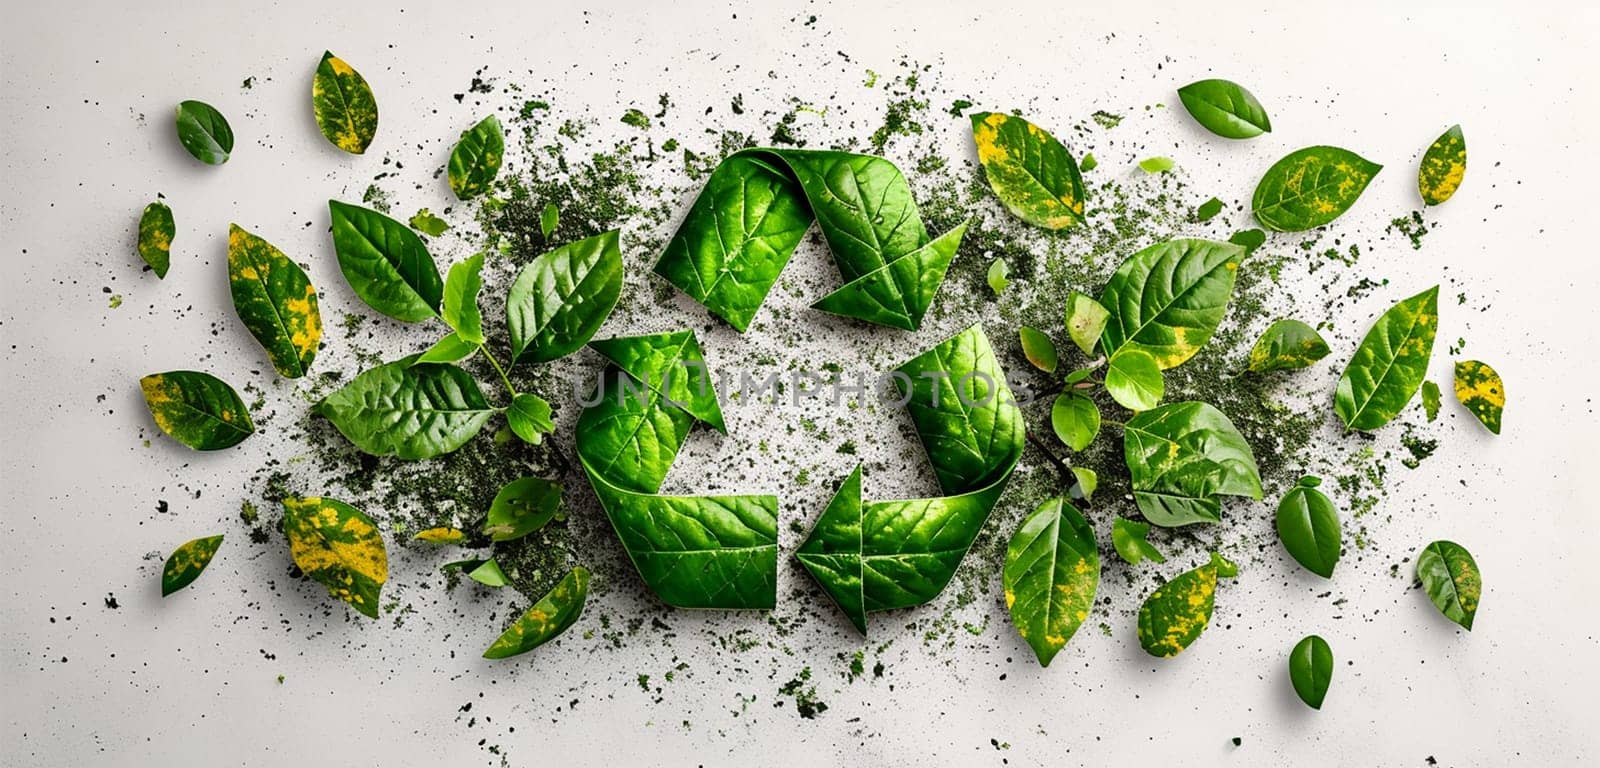 Recycle sign with green leaves. Biodegradable recyclable plastic free package icon. Bio recyclable degradable label logo template Copy space by Annebel146